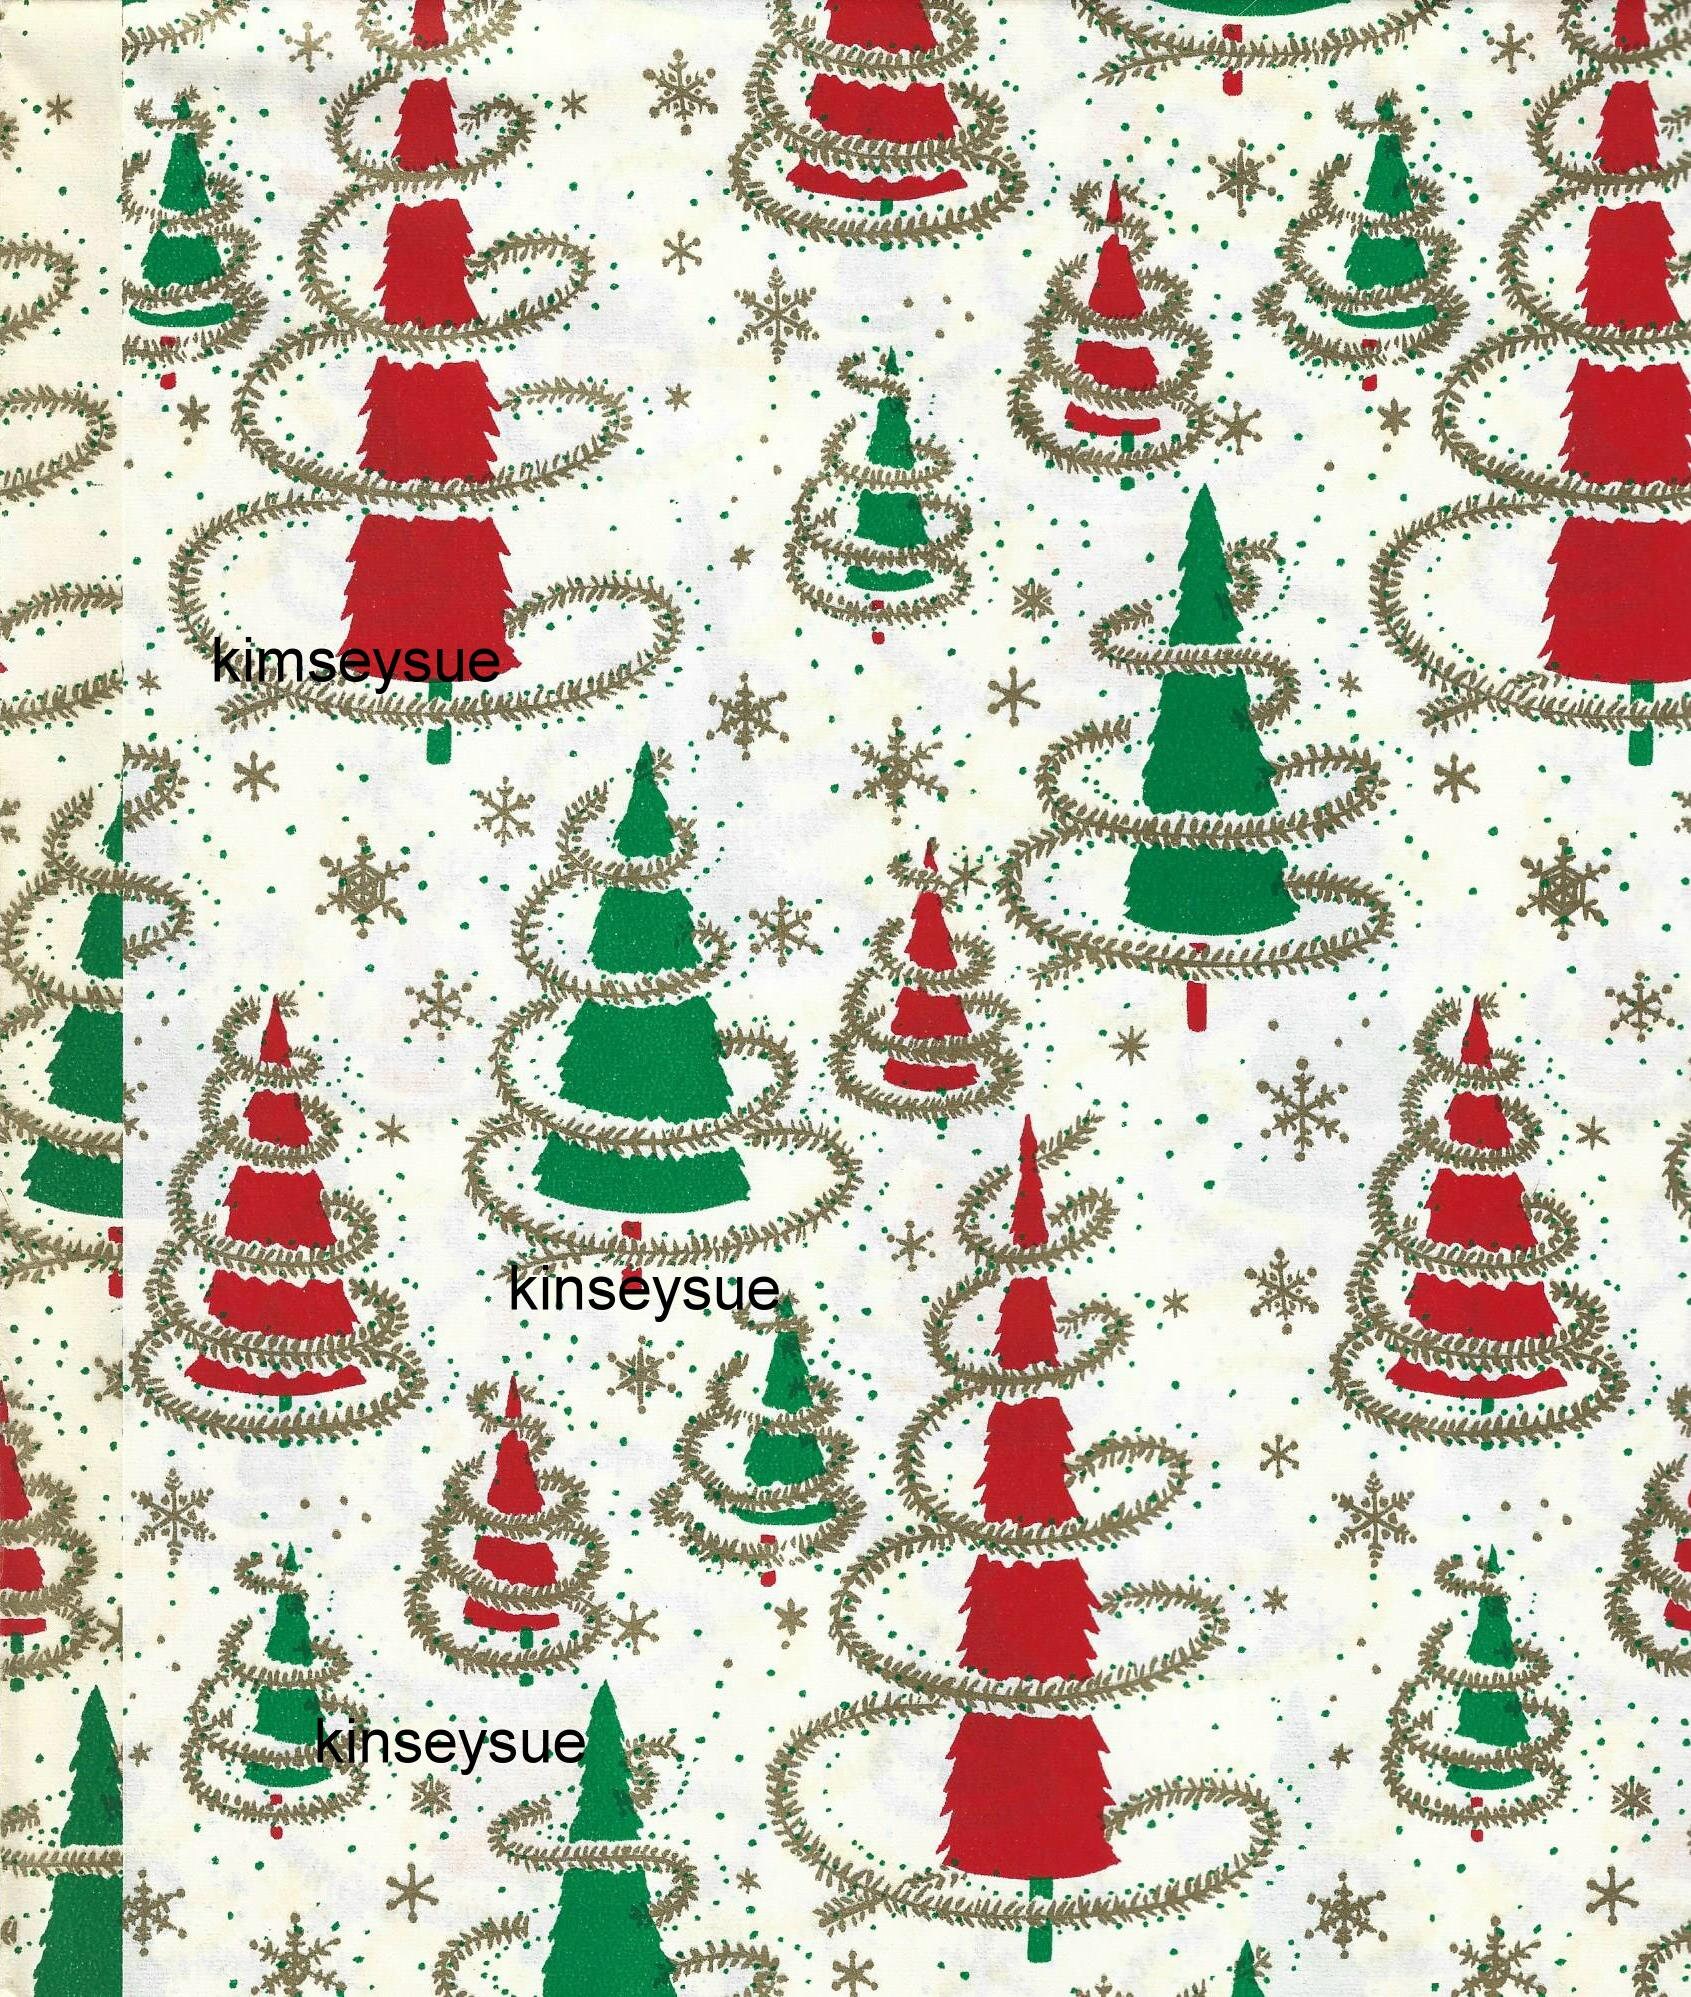 1940s Vintage Christmas Wrapping/Tissue Paper Christmas Stars Christmas  Gift Wrap One Flat Sheet